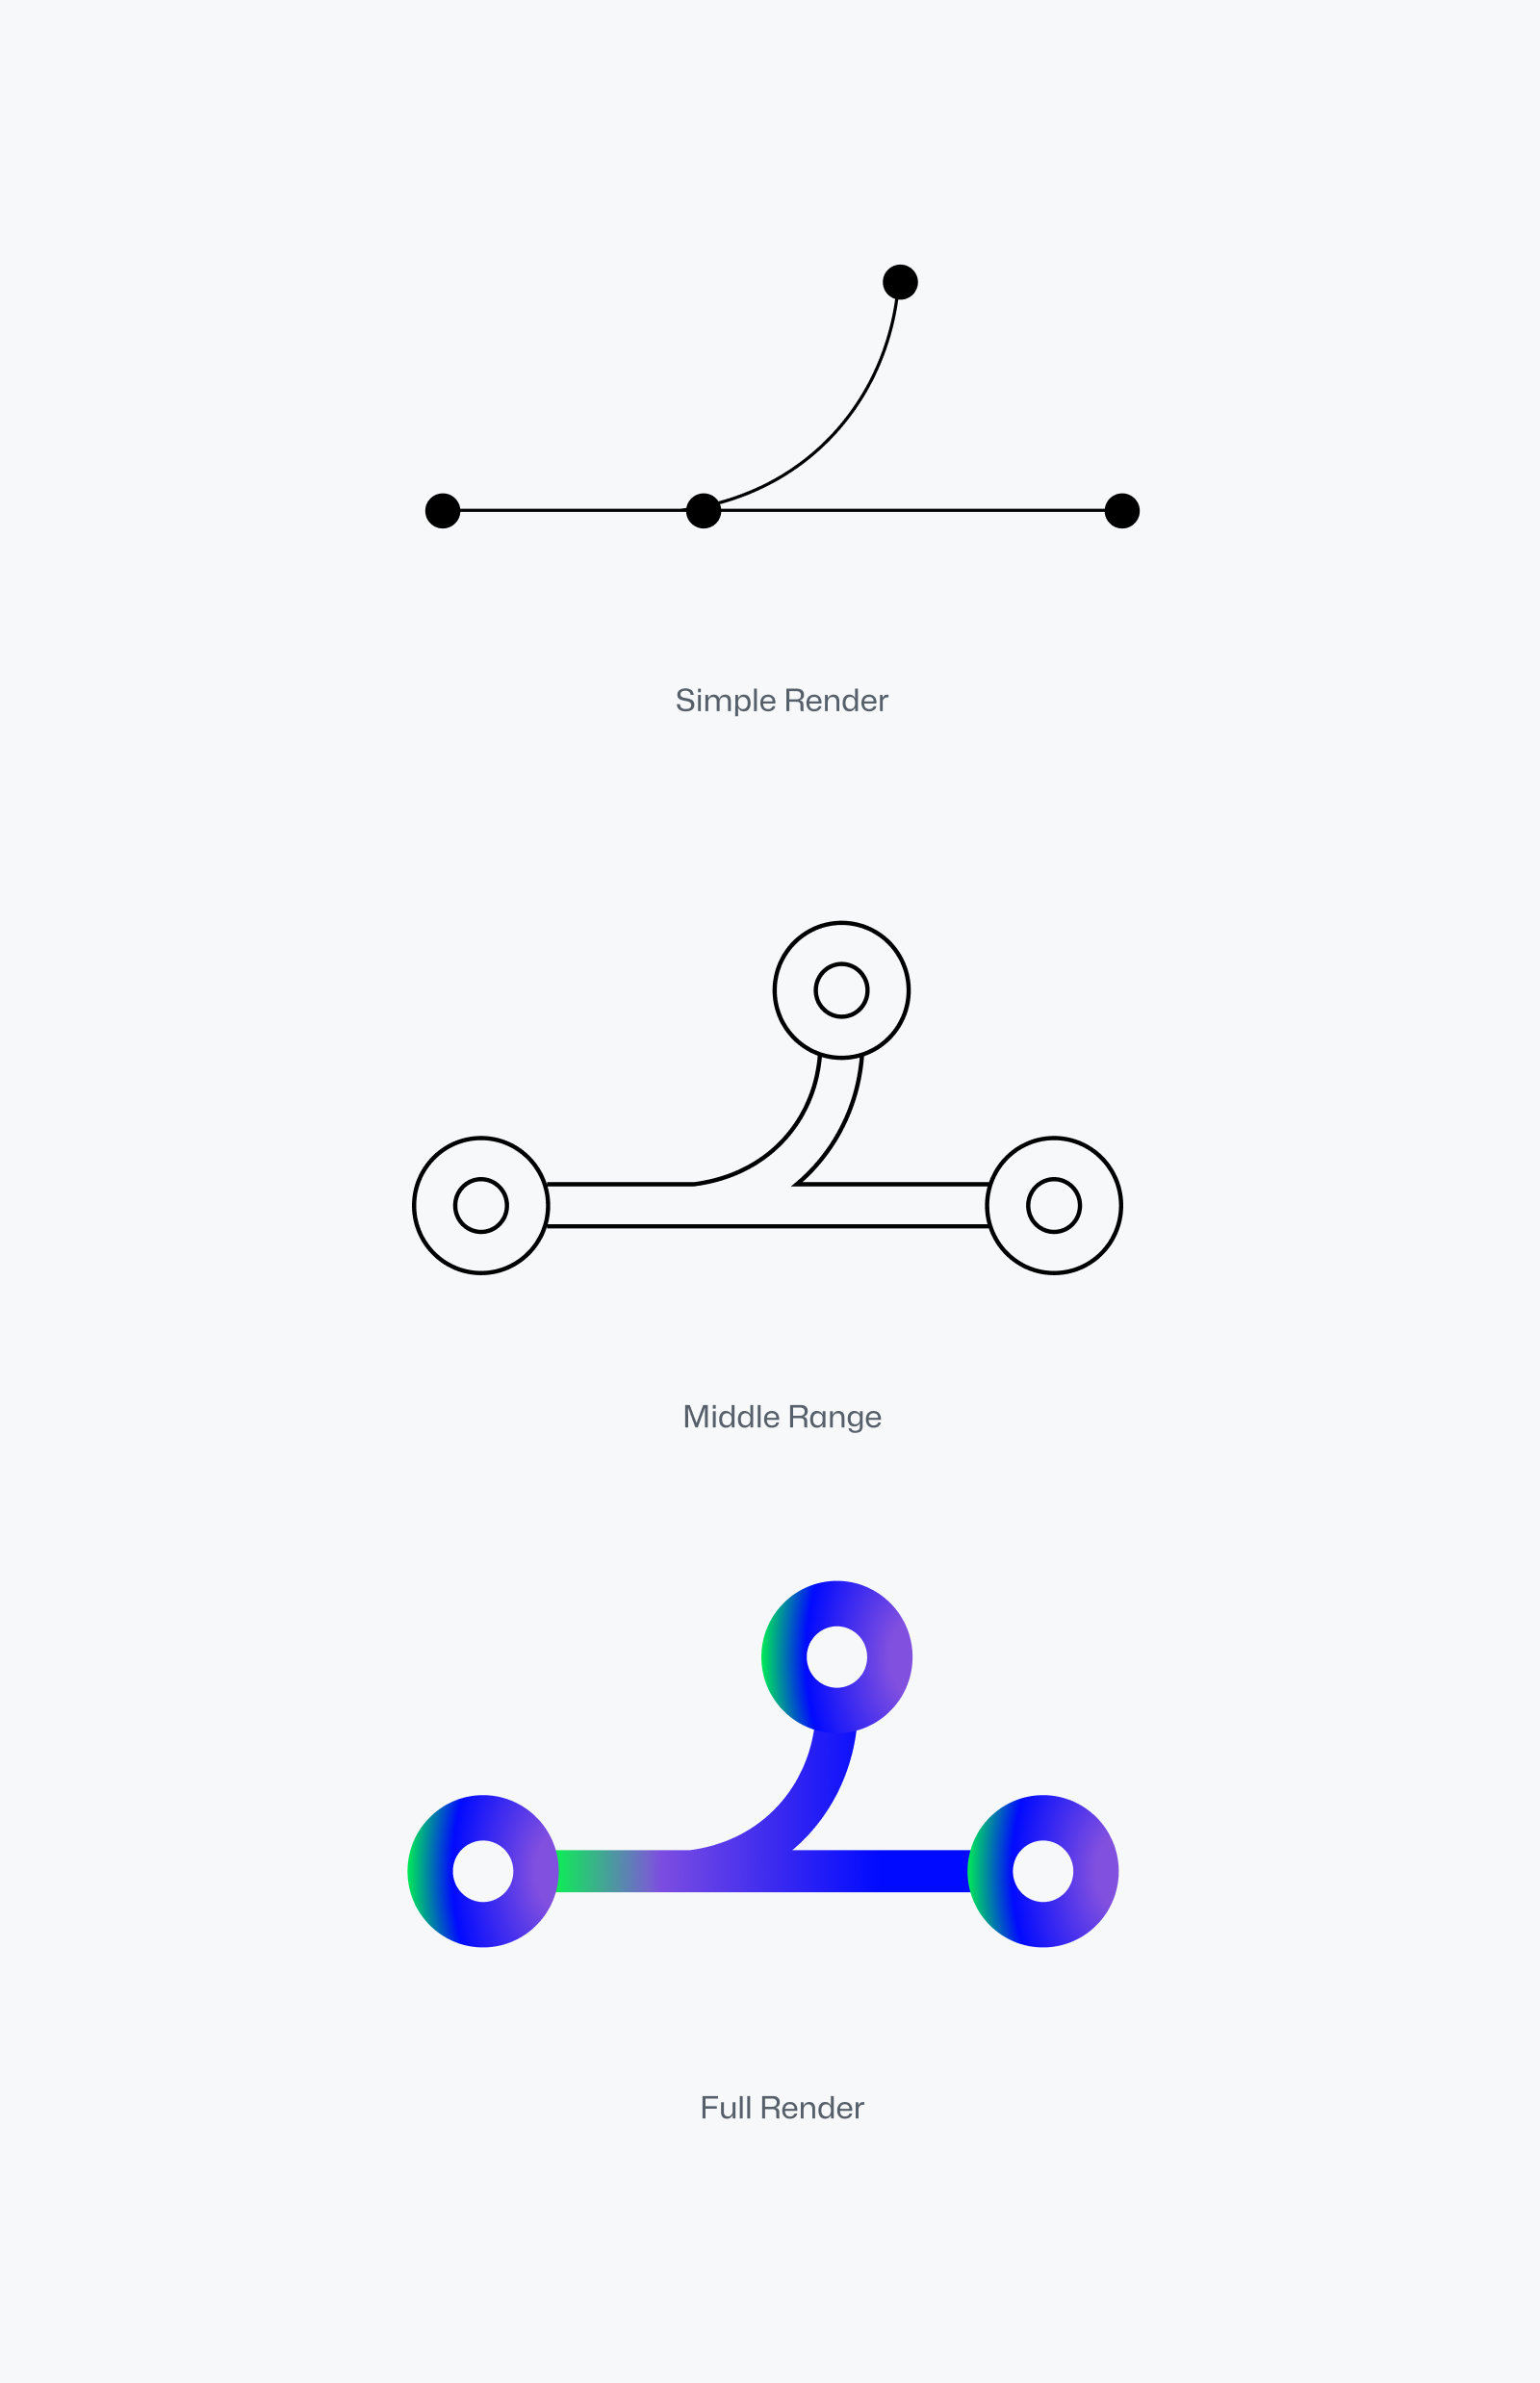 Three illustrations of a forking git line. From top to bottom, the illustrations range from simple to more full renders featuring color and texture.